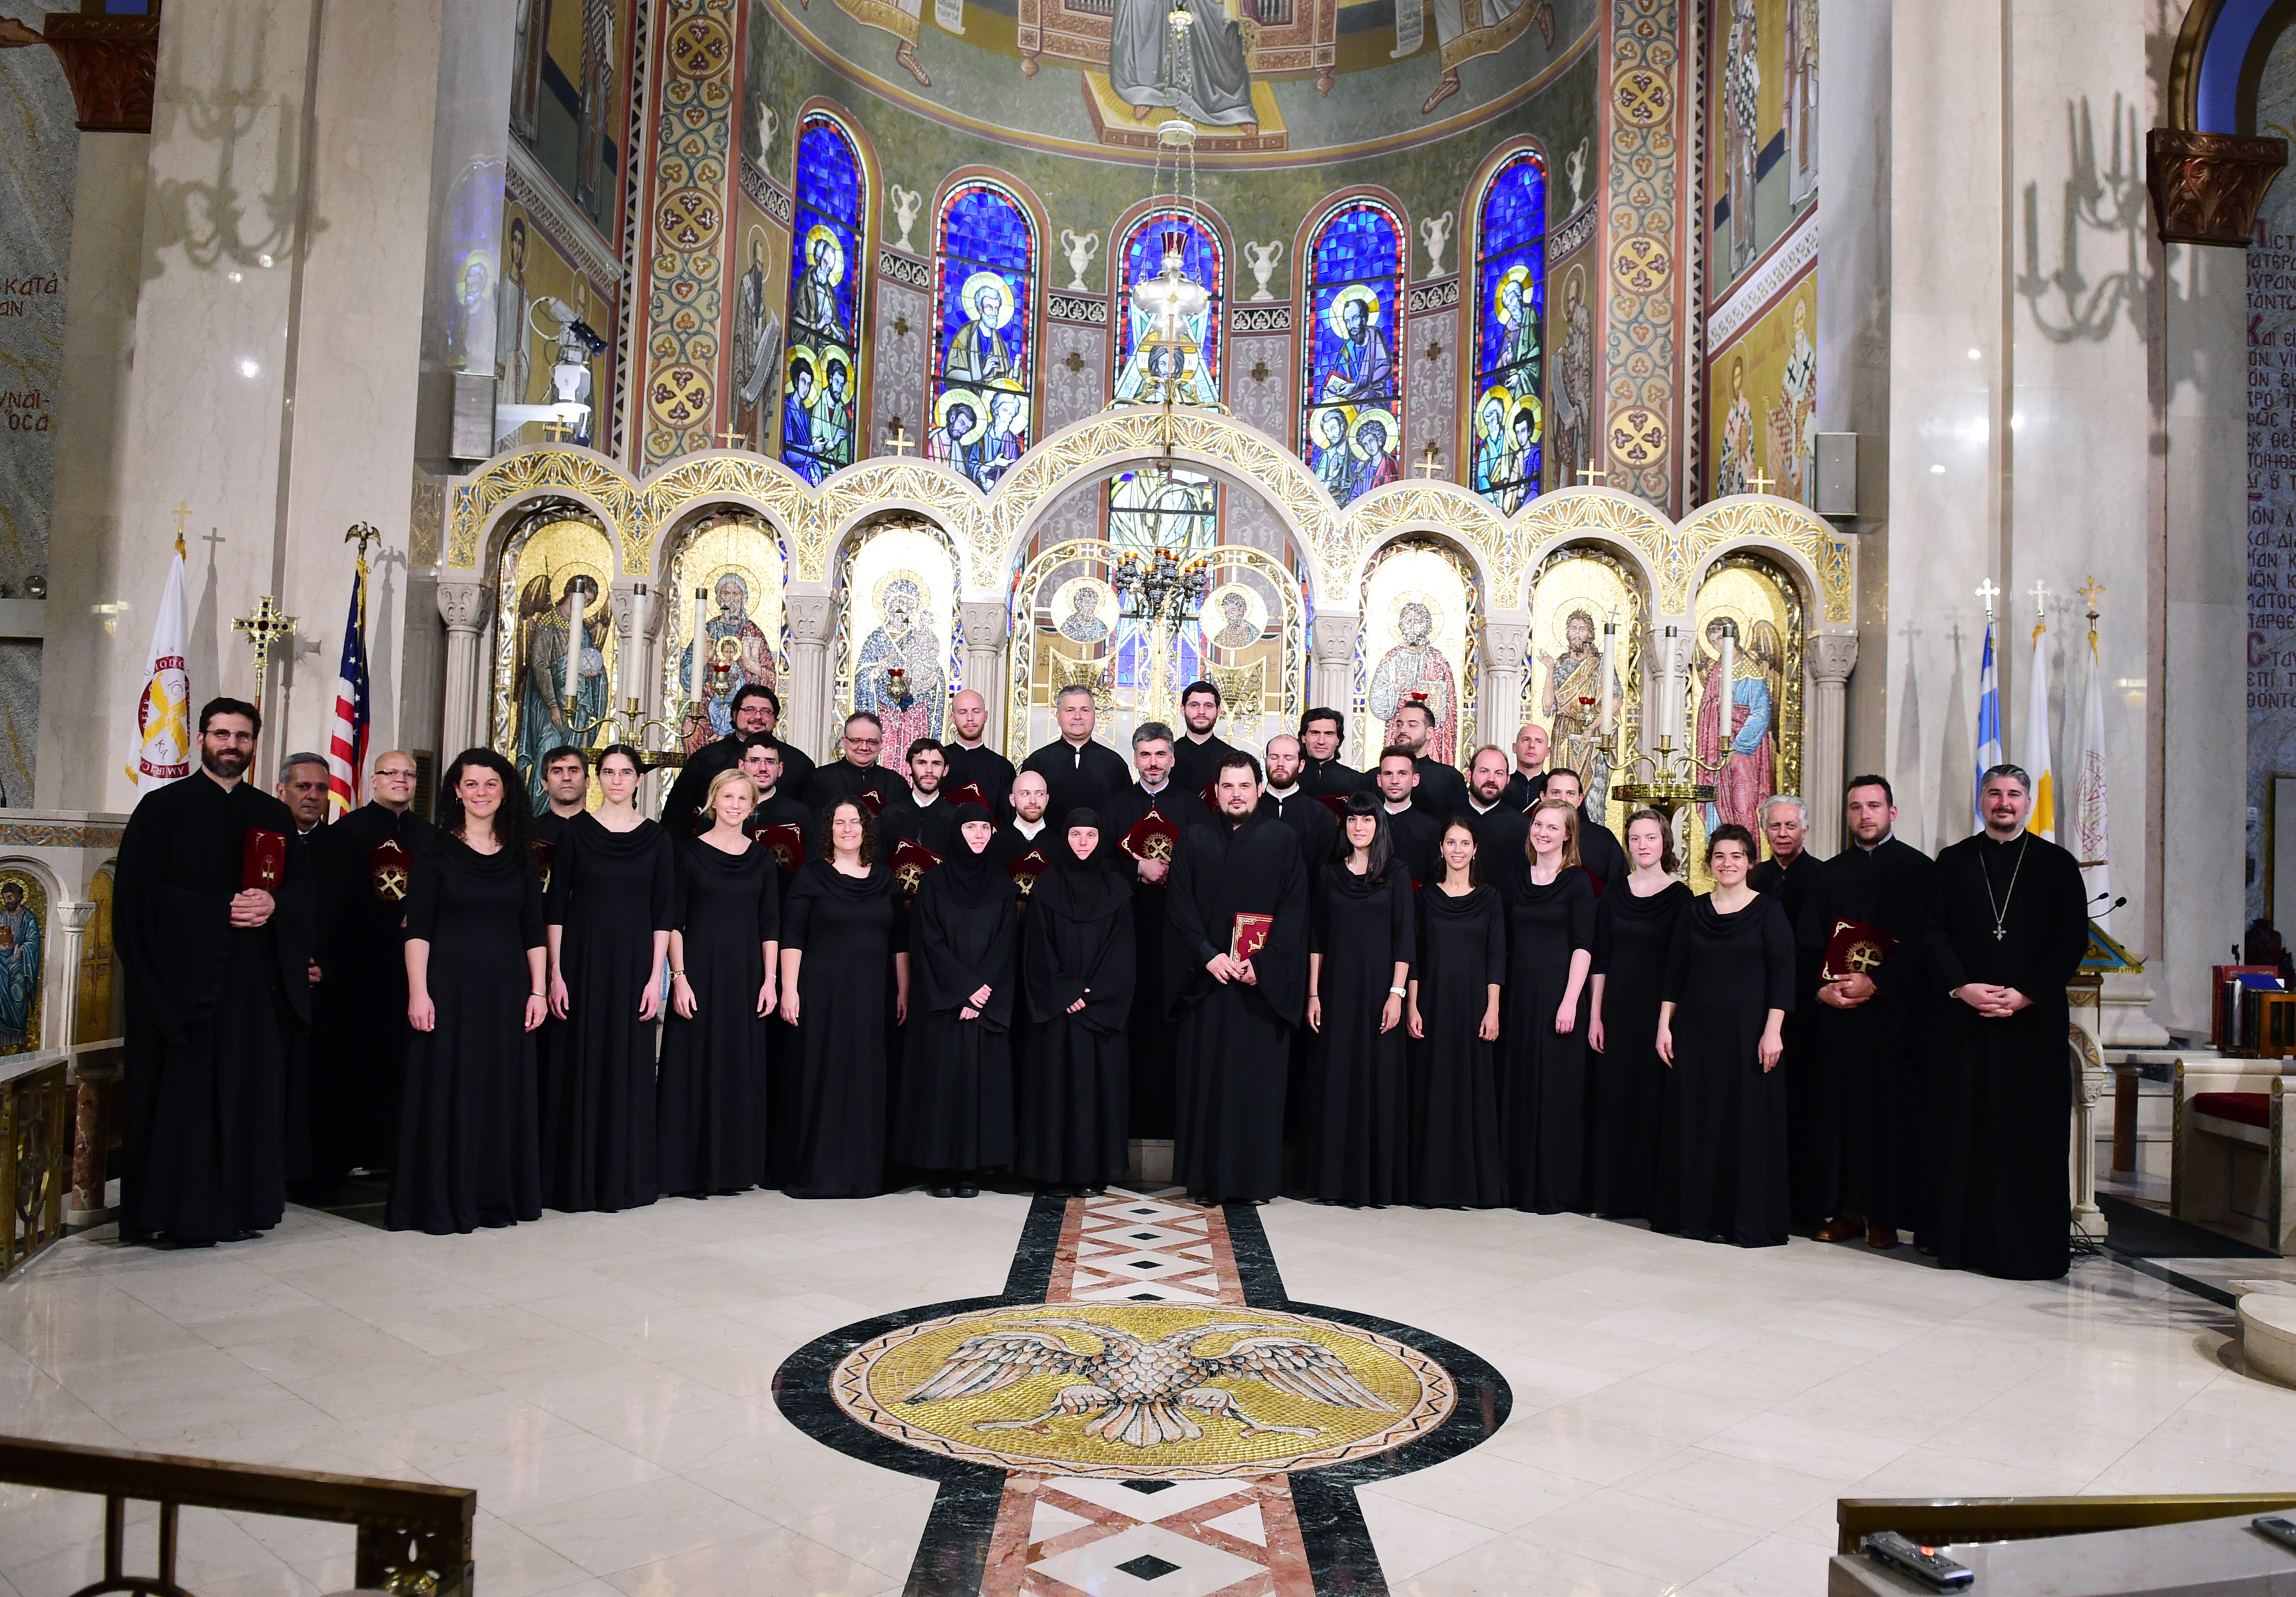 The Archdiocesan Byzantine Choir,and St. Kassiani Choir Concert at The Holy trinity Cathedral in NY. PHOTO:© D. PANAGOS